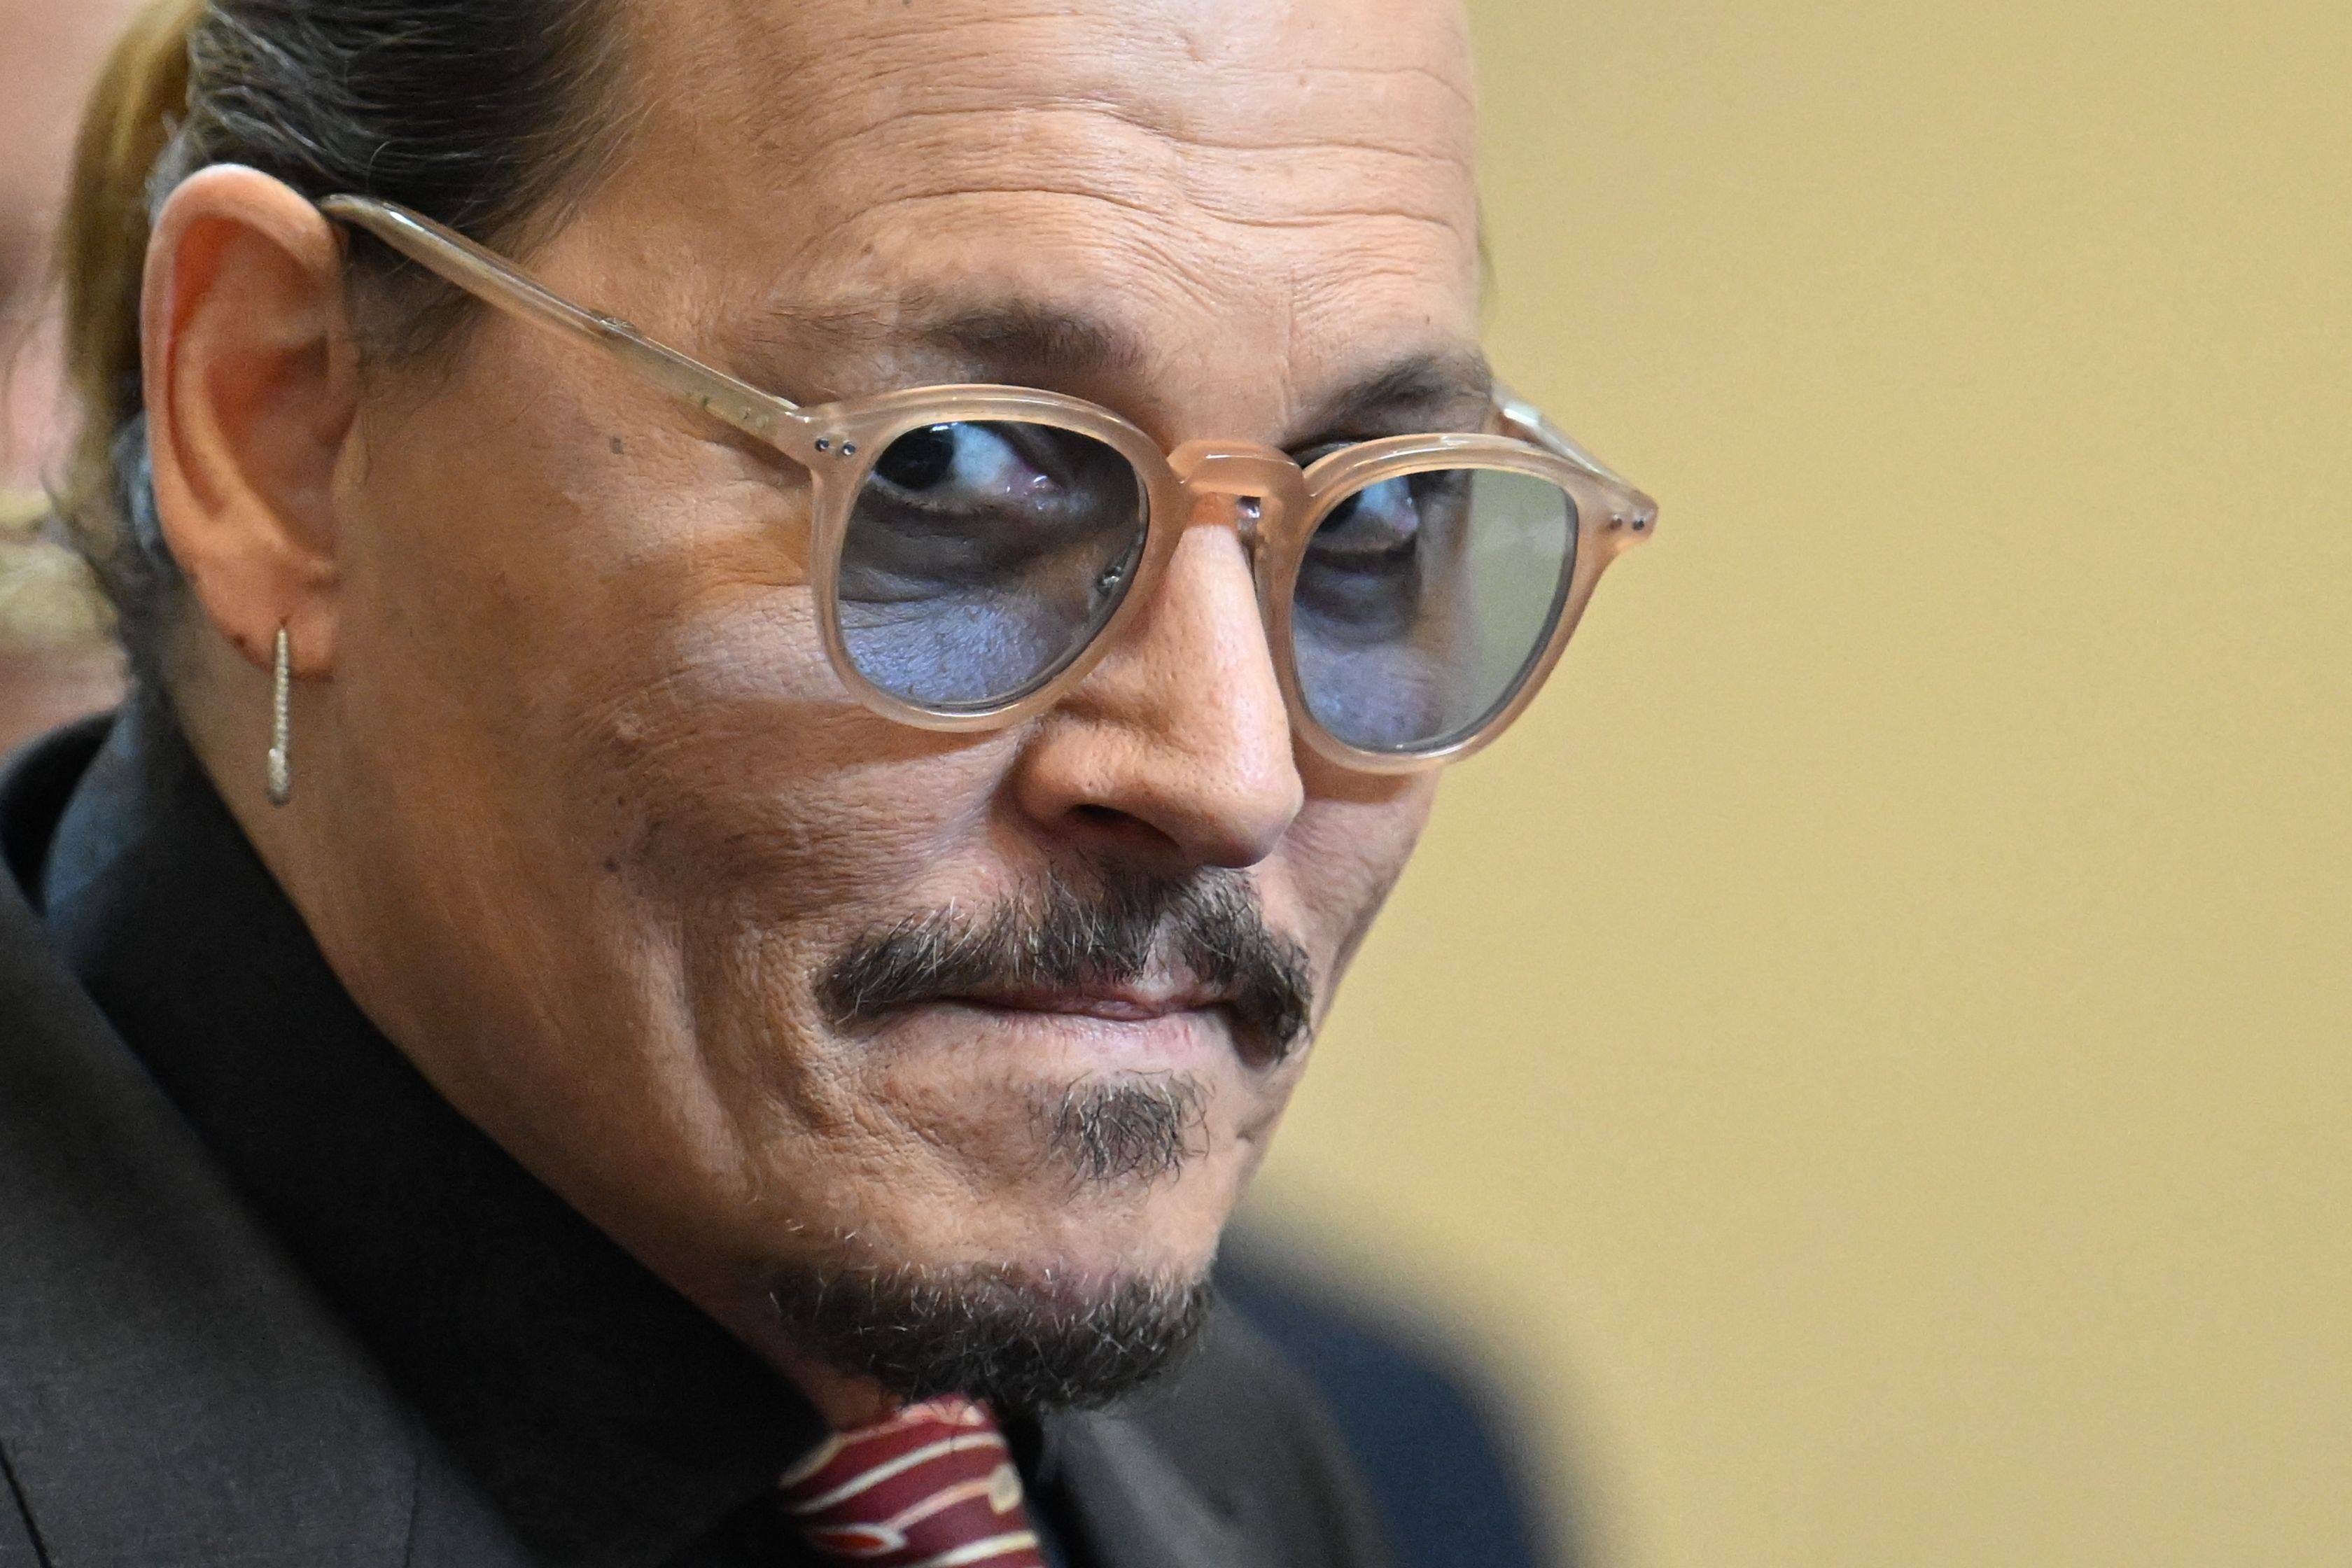 Whoopsie daisy! Where did Johnny Depp’s millions go, and is he solely to blame? Photo: AFP